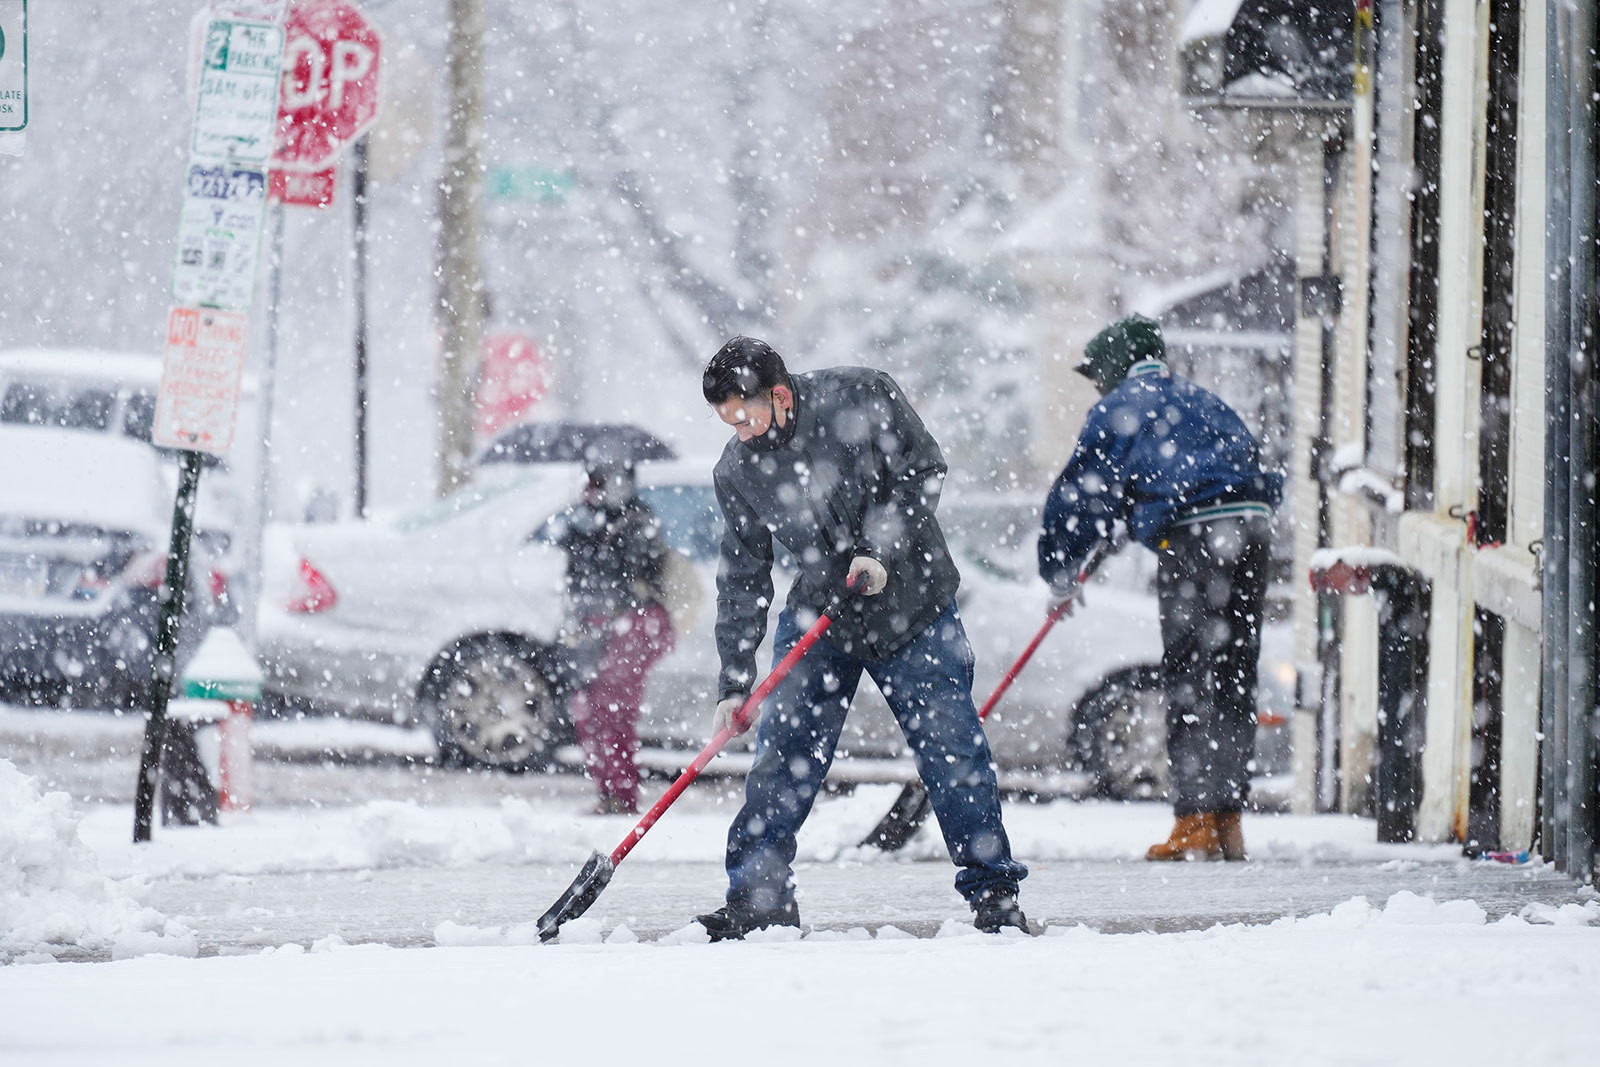 People clear a sidewalk during a winter snow storm in Philadelphia on Tuesday.